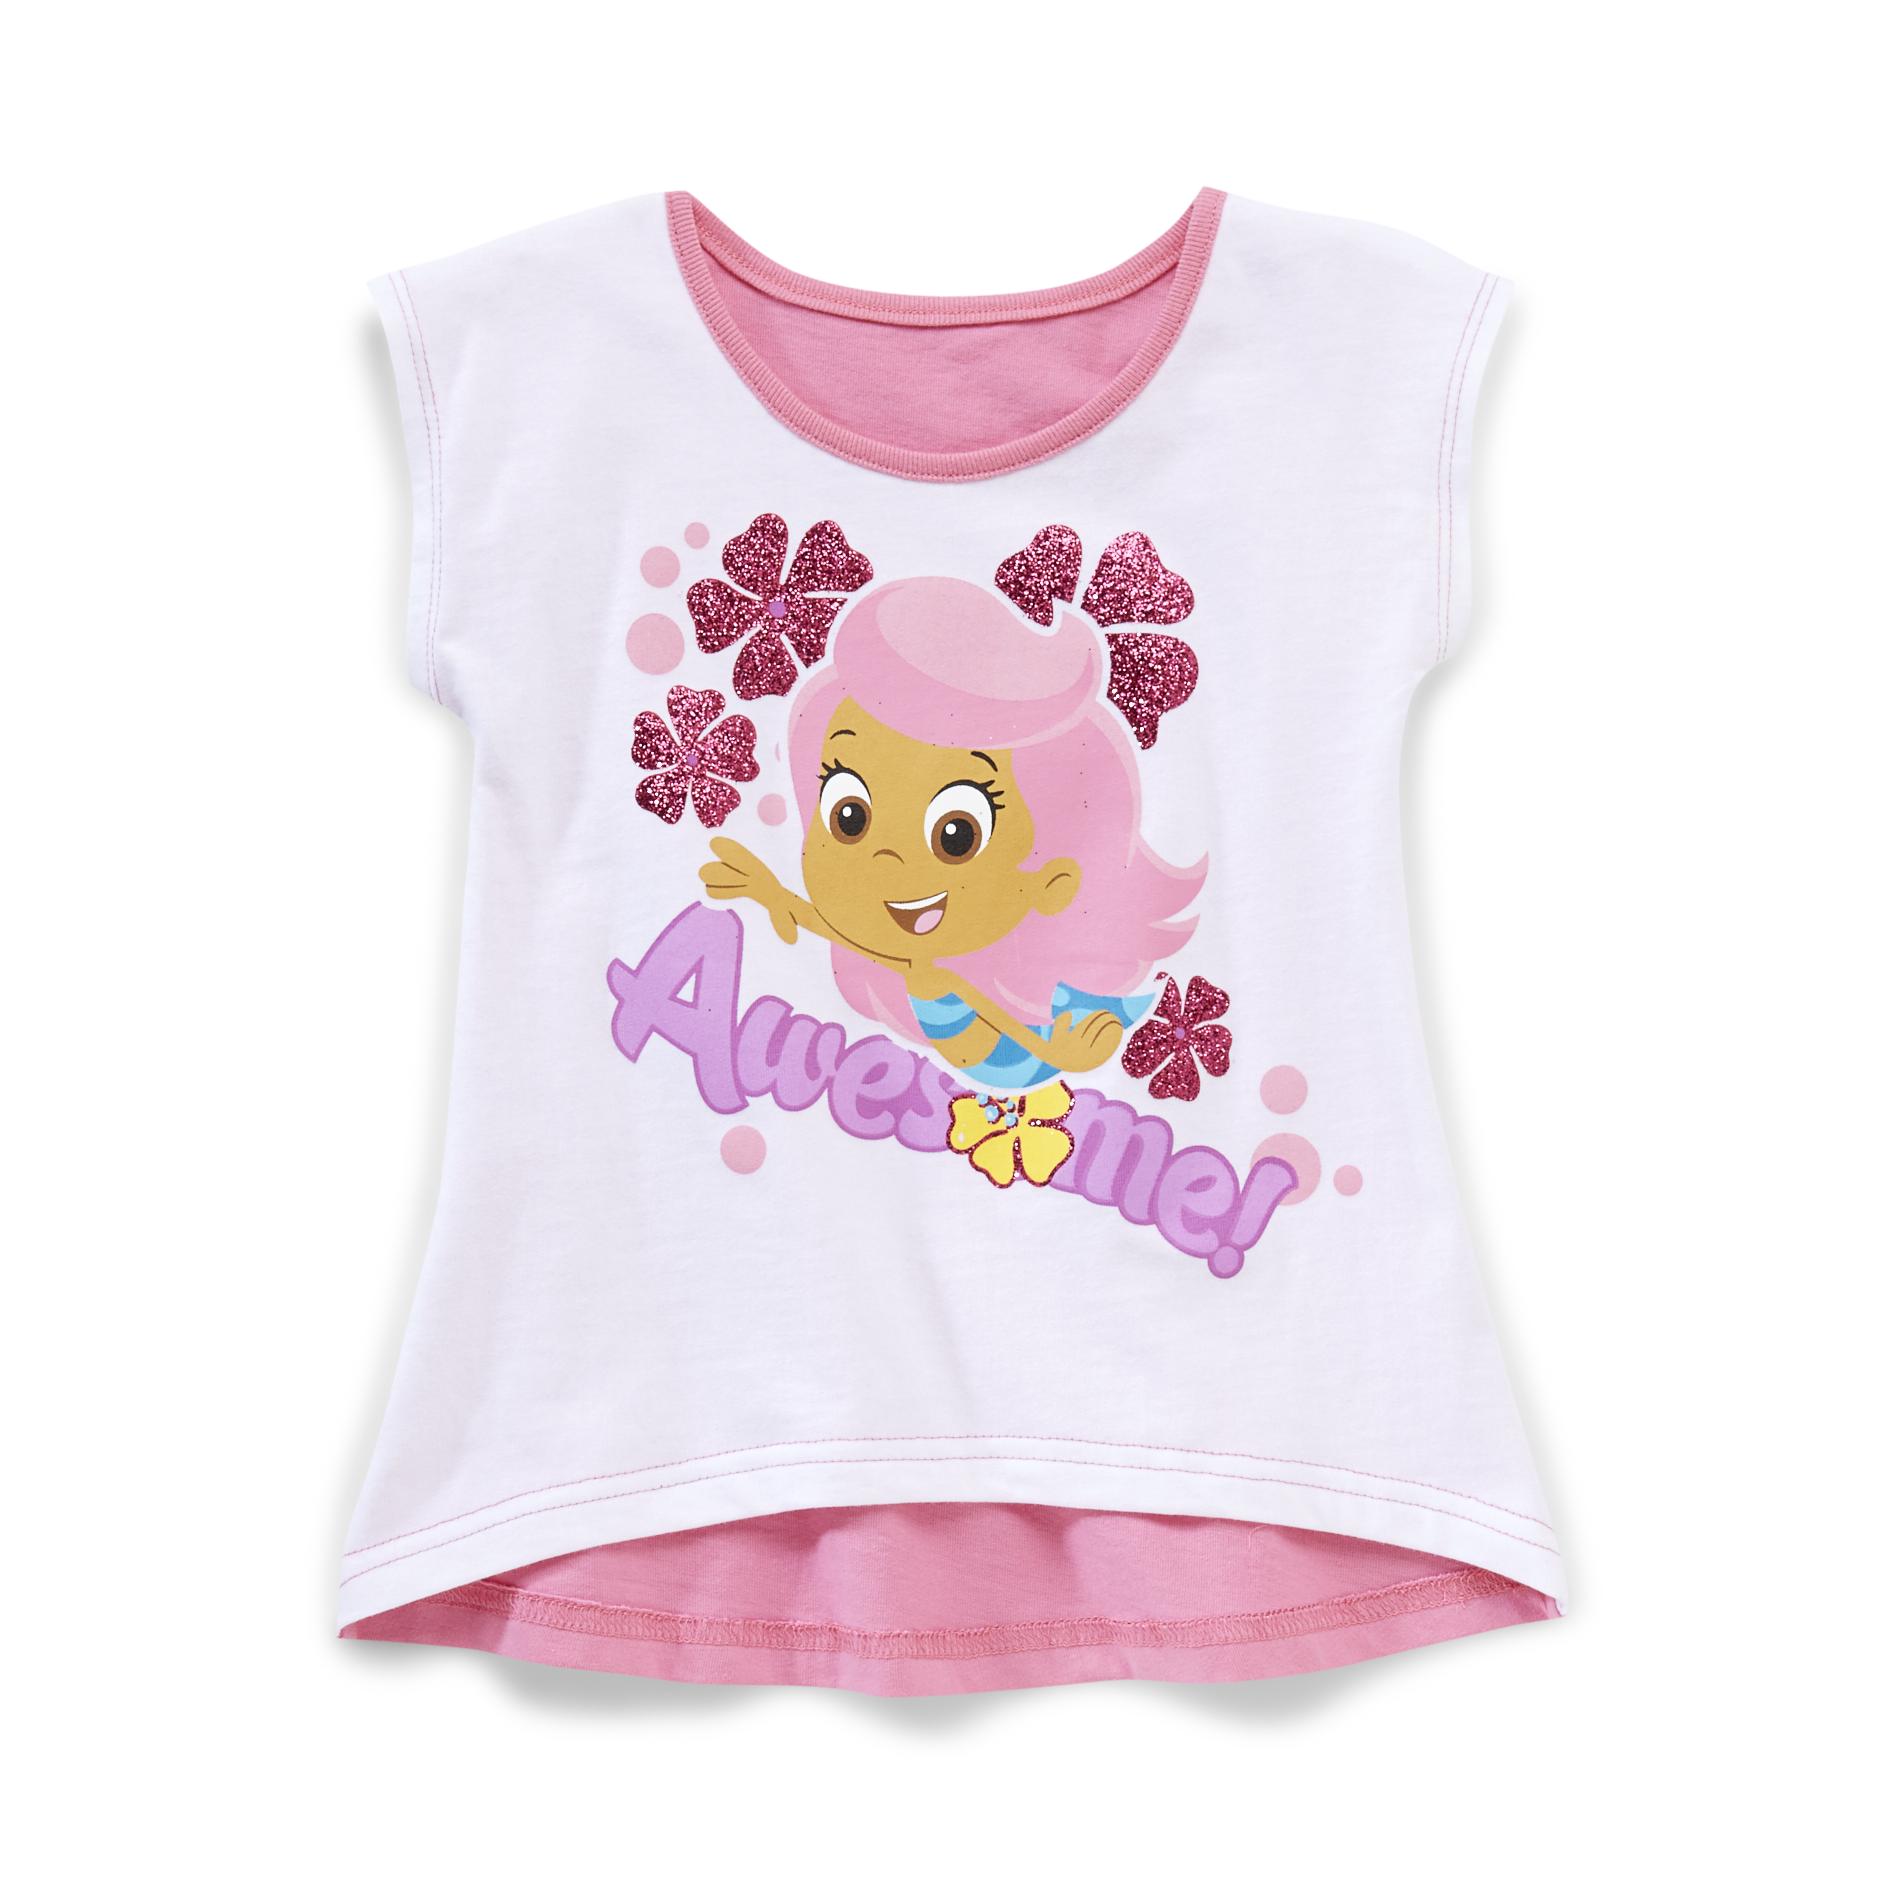 Nickelodeon Toddler Girl's Top - Bubble Guppies